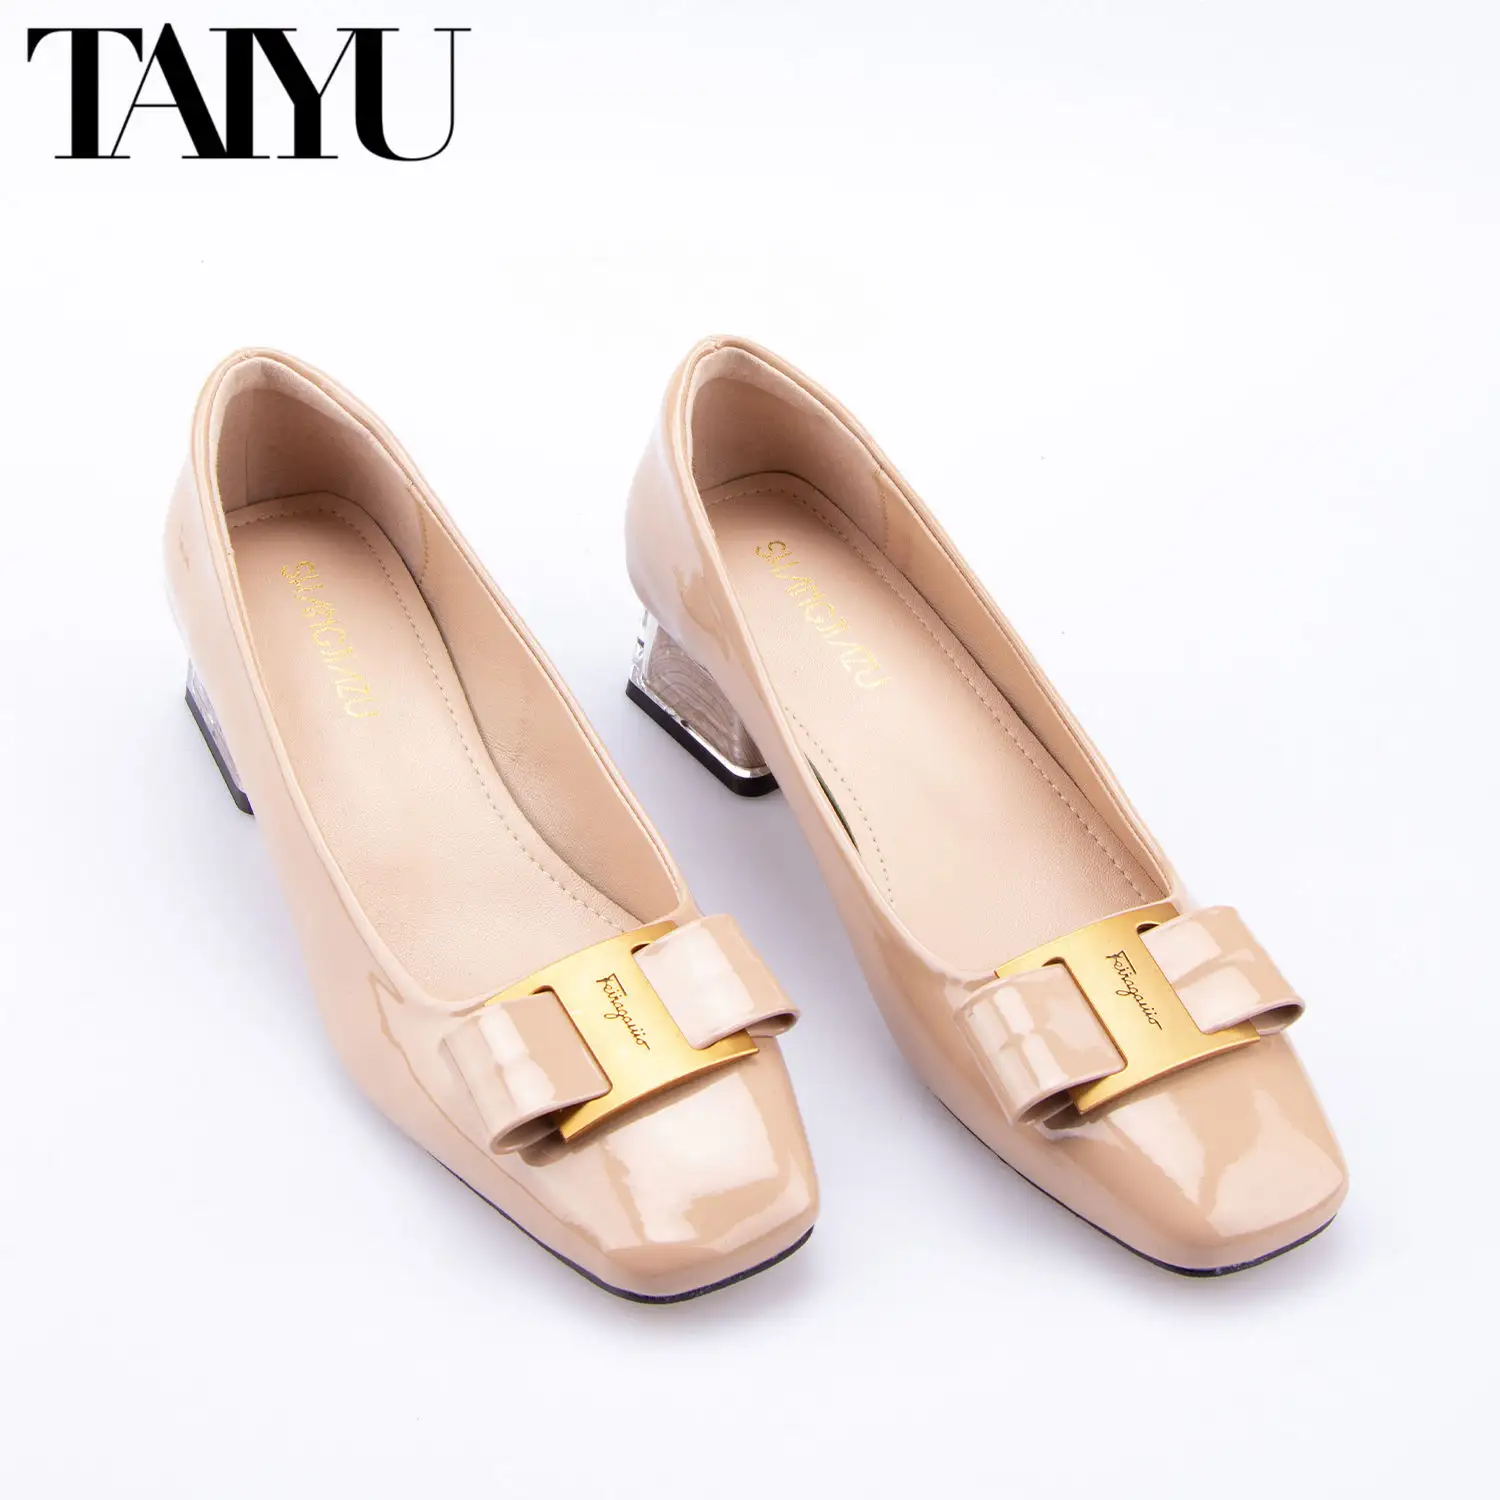 Wholesale Factory Price Square Heeled Pumps Shoes Fashion Lady's Square PU Leather Pumps Shoes for Women